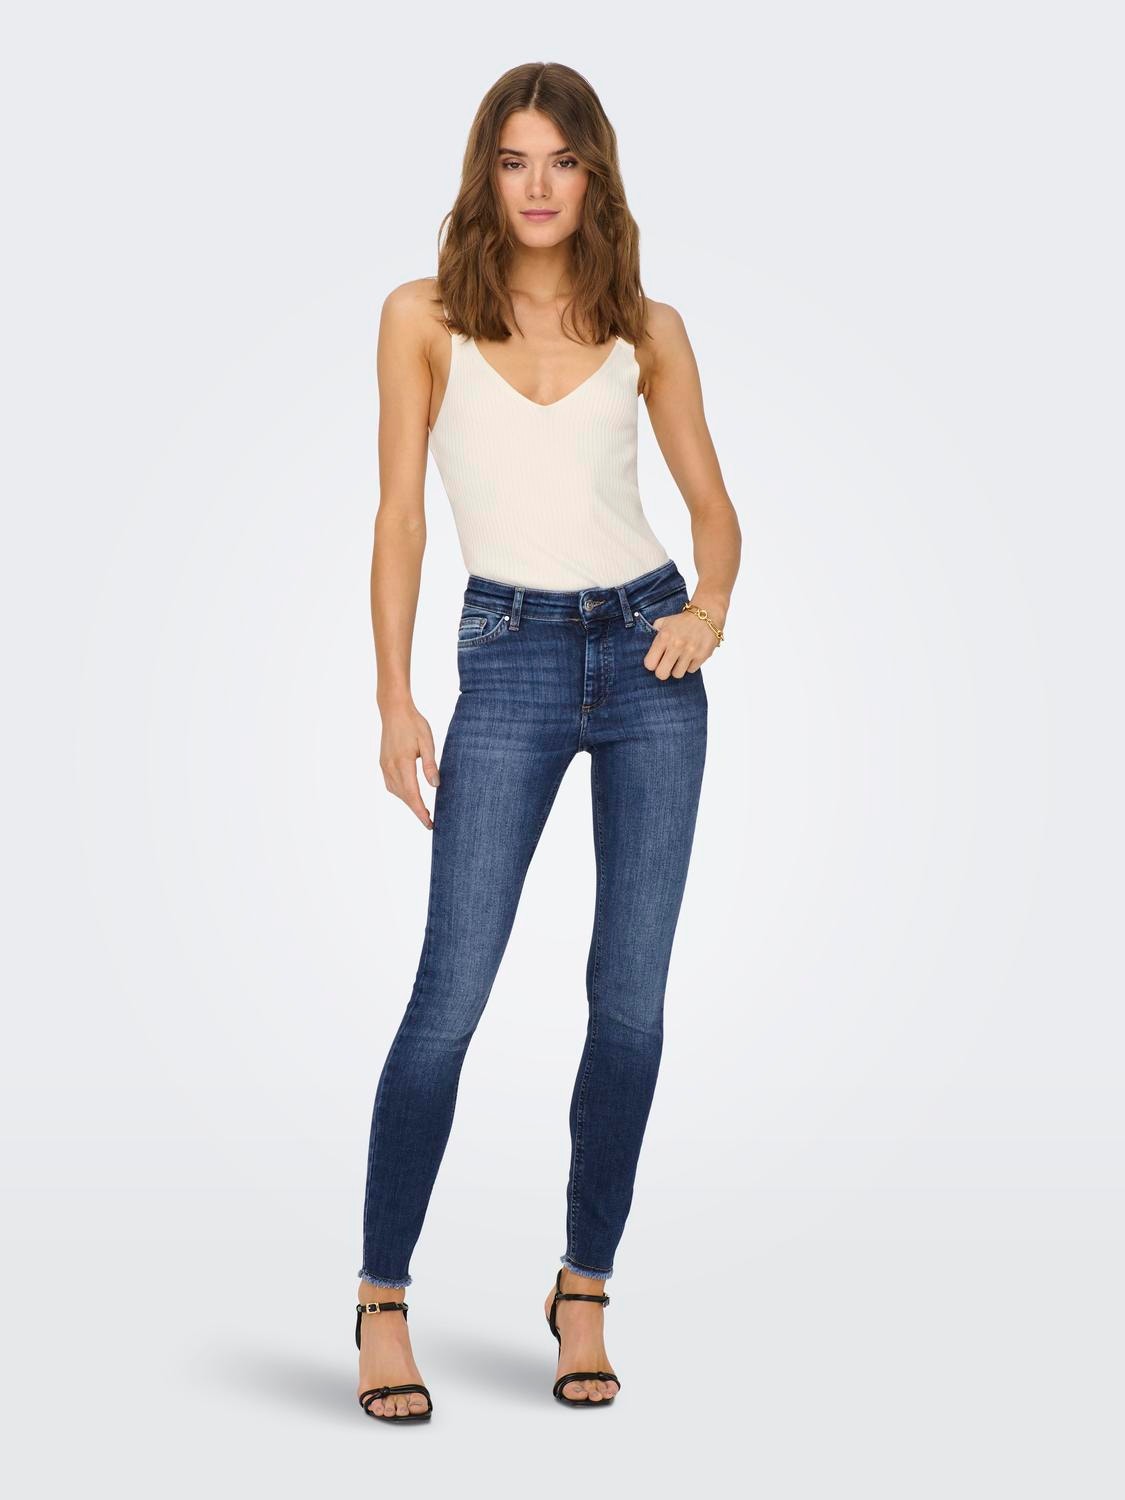 ONLY Jeans Skinny Fit Taille moyenne Ourlet brut -Medium Blue Denim - 15266225